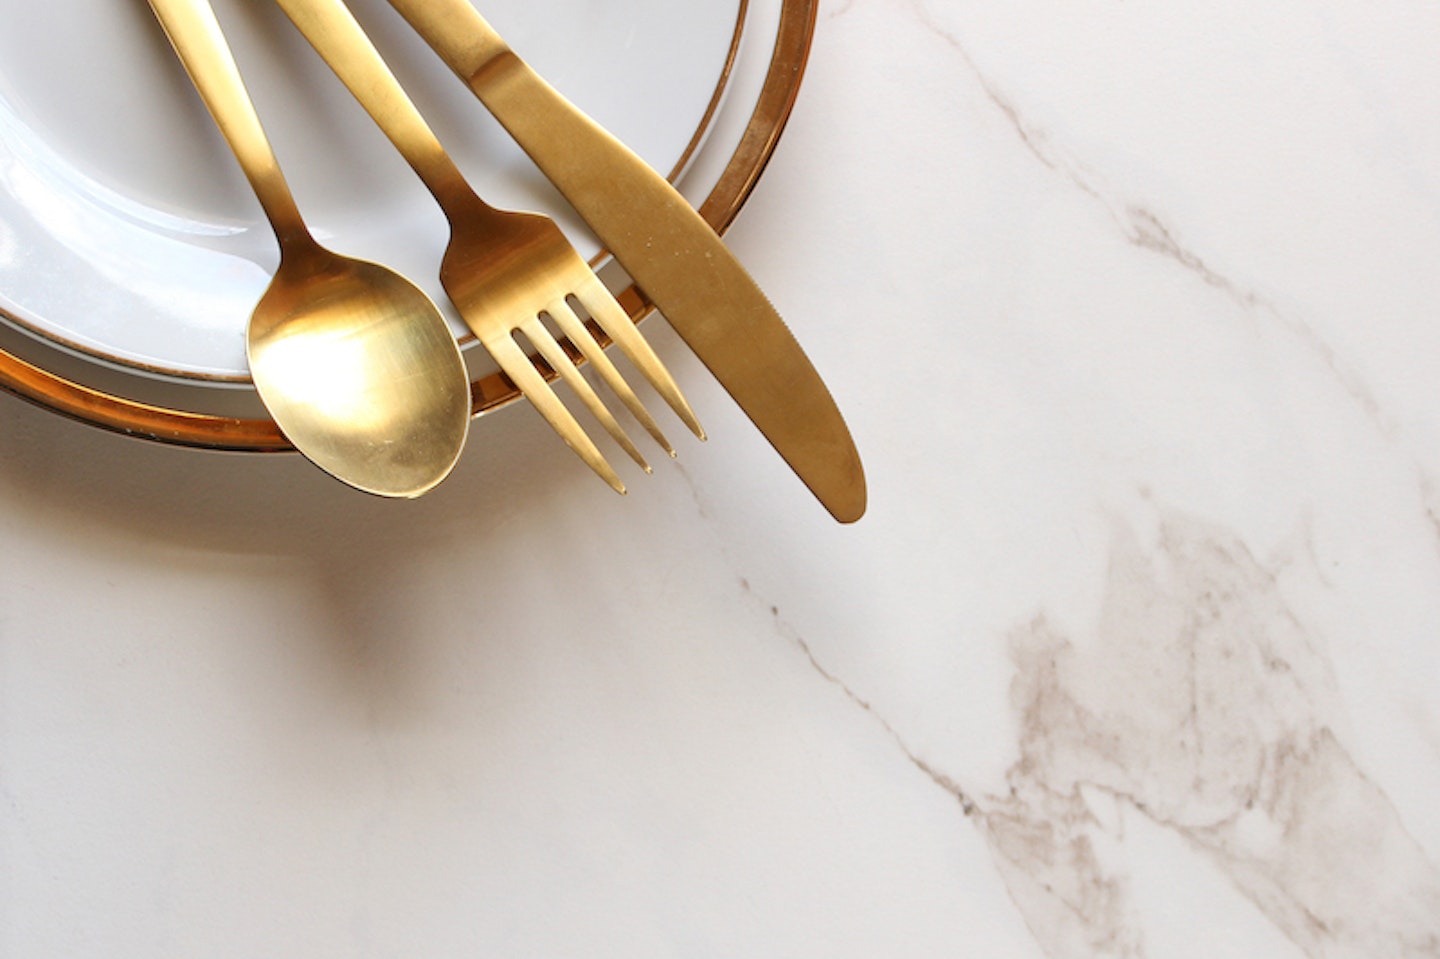 Gold Cutlery Sets You'll Love 